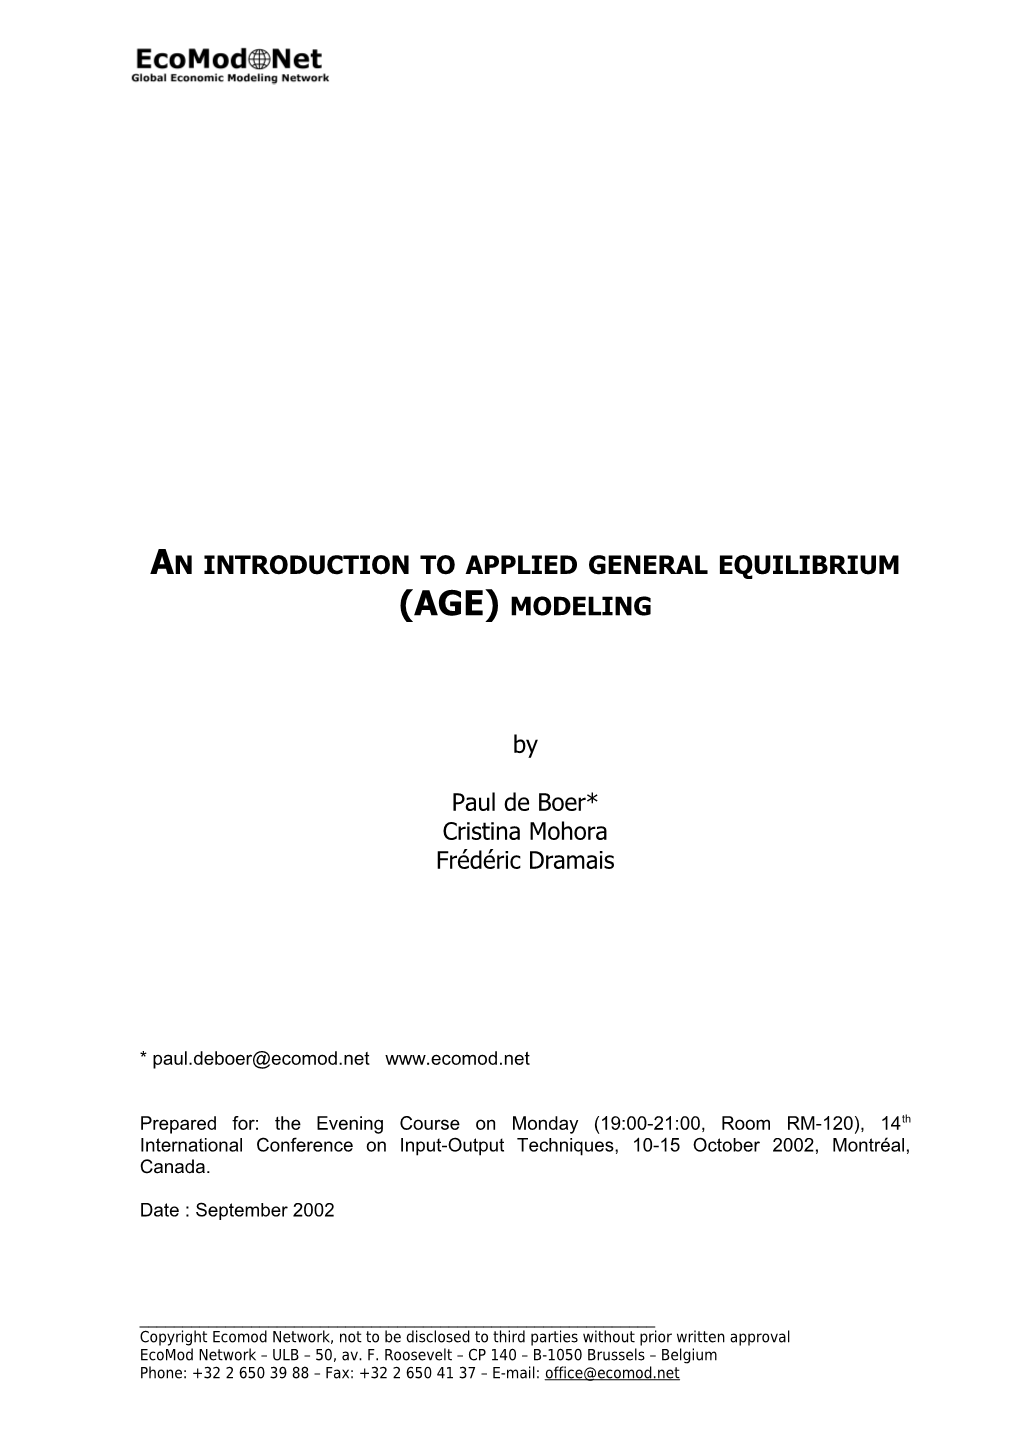 An Introduction to Applied General Equilibrium (AGE) Modeling